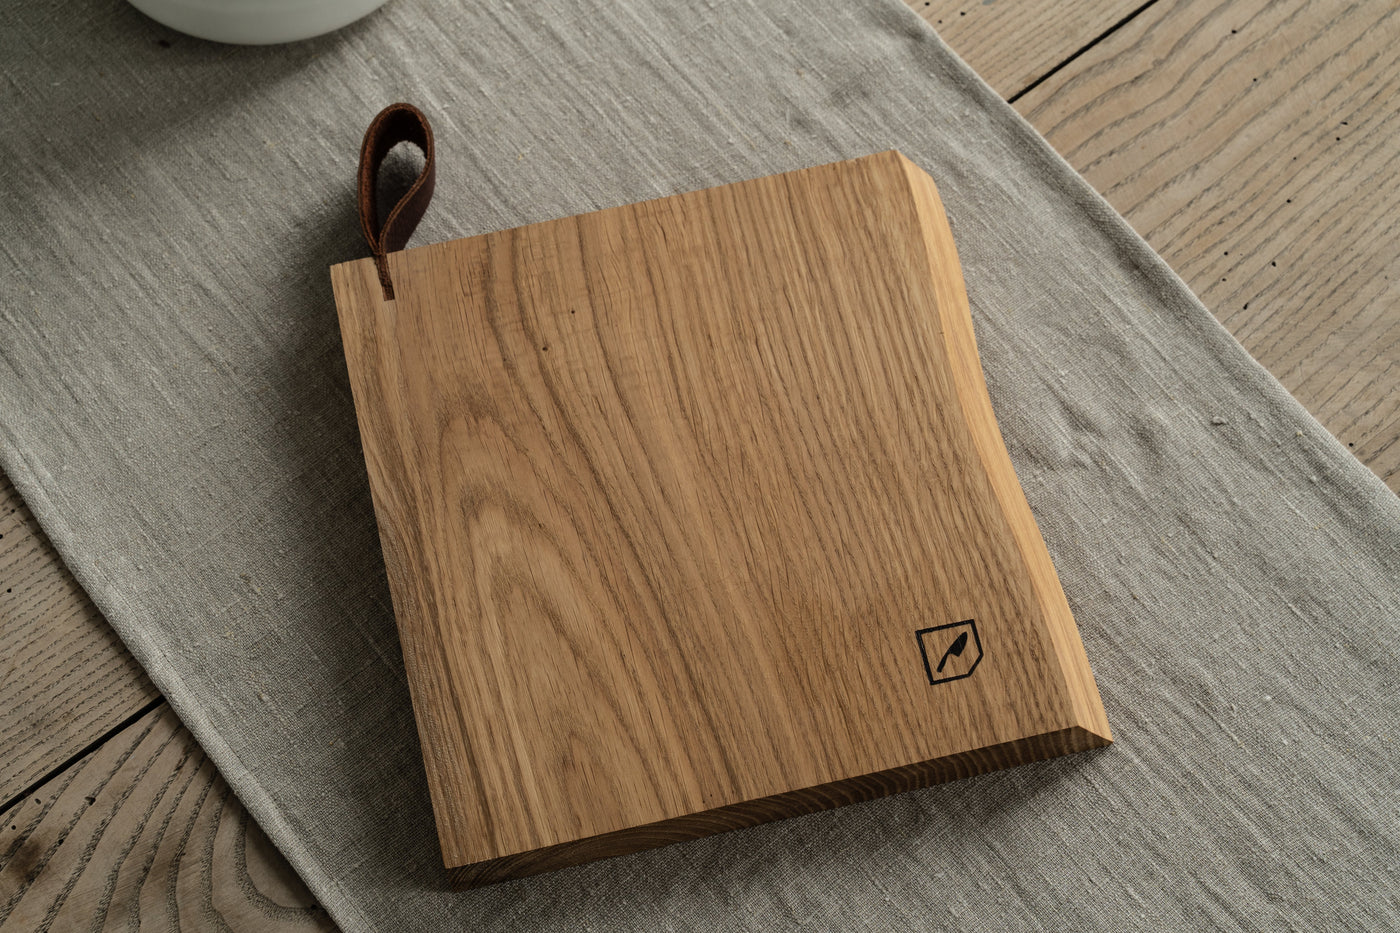 Mediea Medium Oak Cutting Board-Cooking and Eating-COOKING/SERVING TOOLS, TABLEWARE, TRAYS / BOARDS-Forest Homes-Nature inspired decor-Nature decor